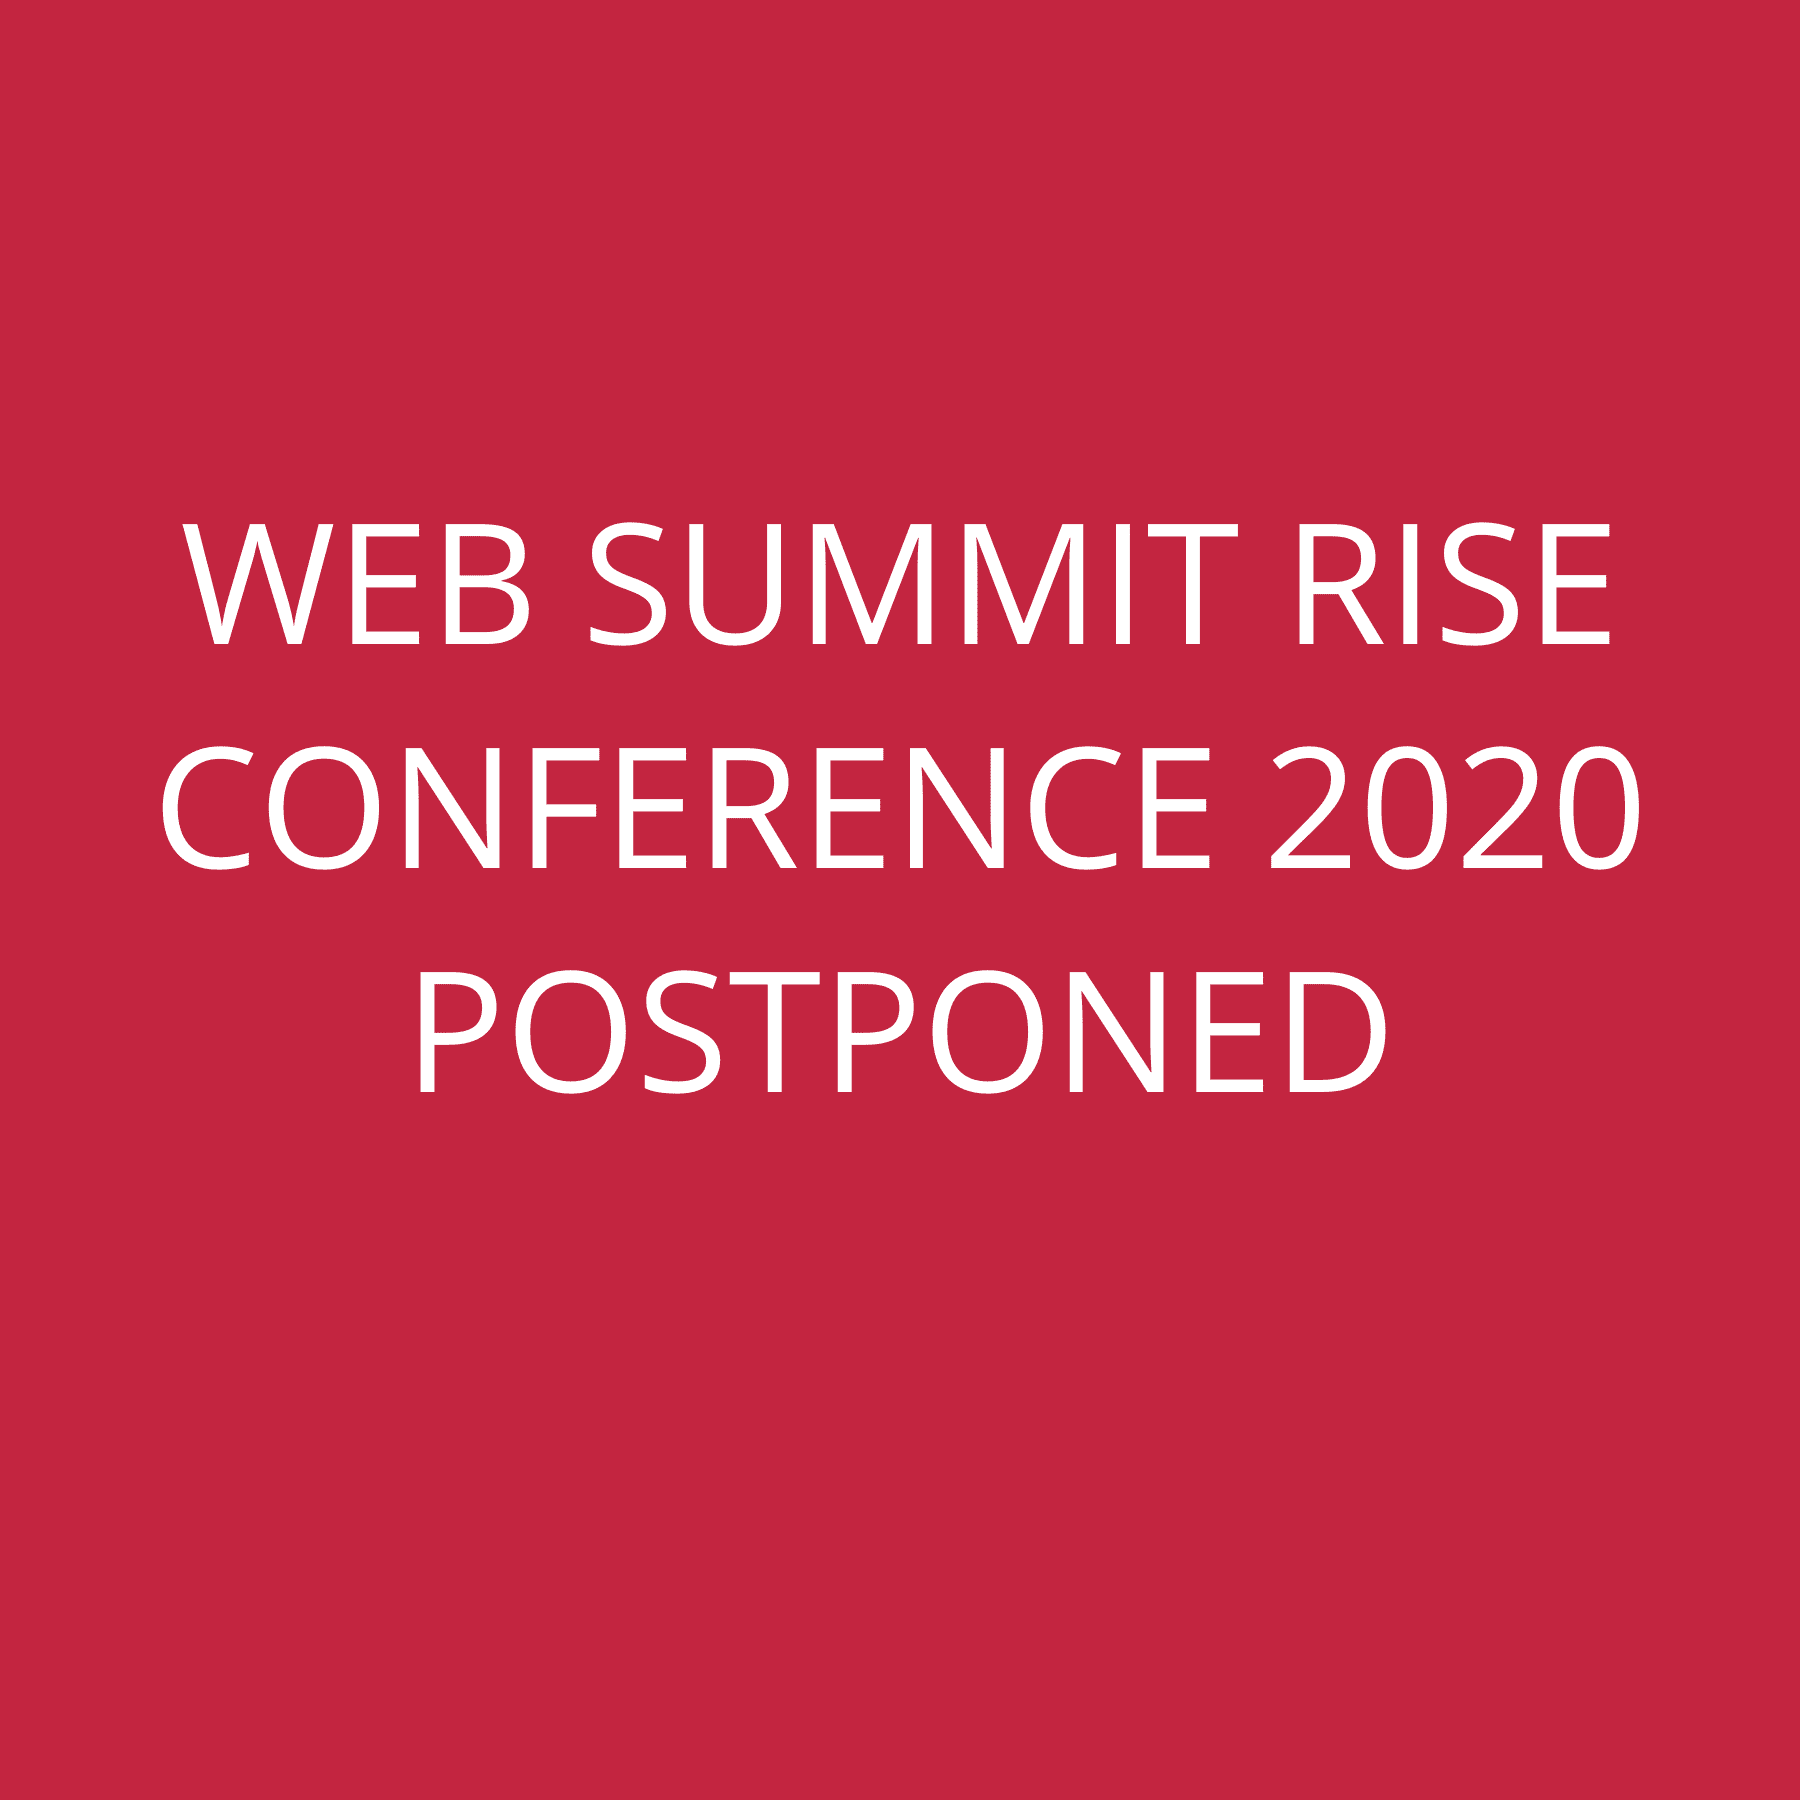 Web Summit Rise Conference 2020 postponed